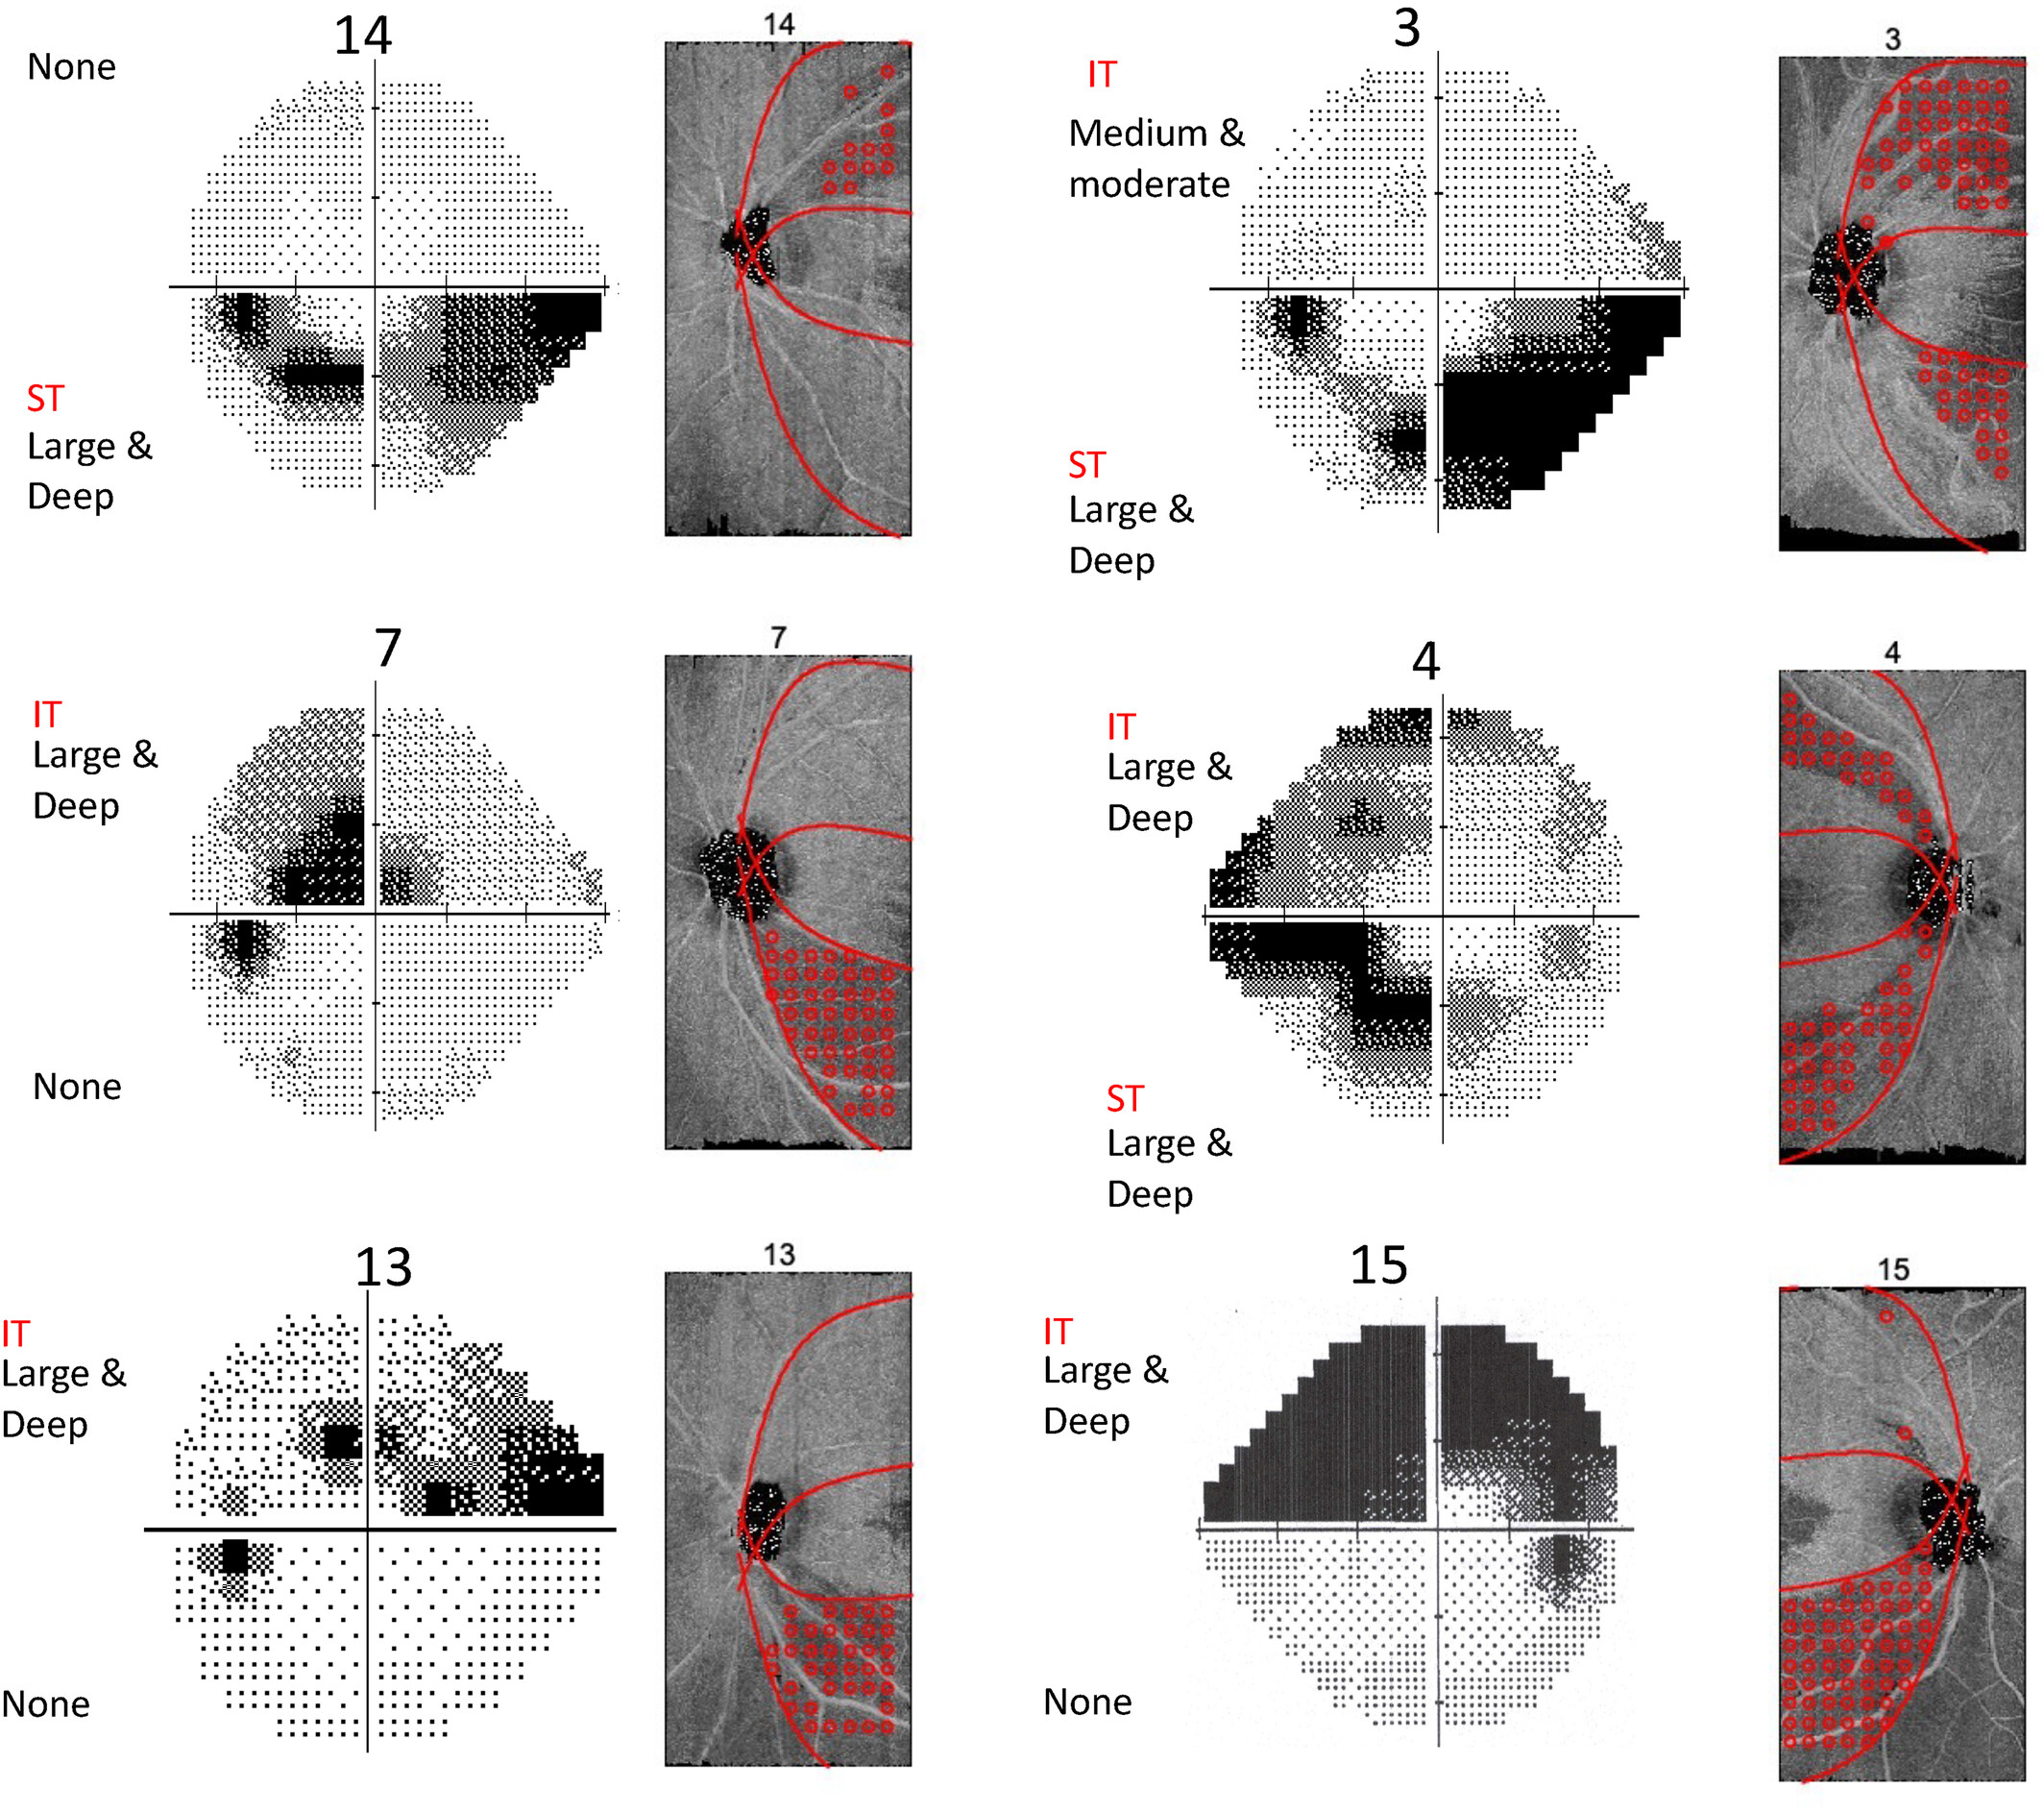 RNFL reflectance images may have potential for use in screening to identify patients most at risk for blindness from undetected glaucoma because of good agreement with perimetry on the location of deep perimetric damage. In this image from the study, anatomical features of RNFL loss (shown in red) correlated with visual field defects.